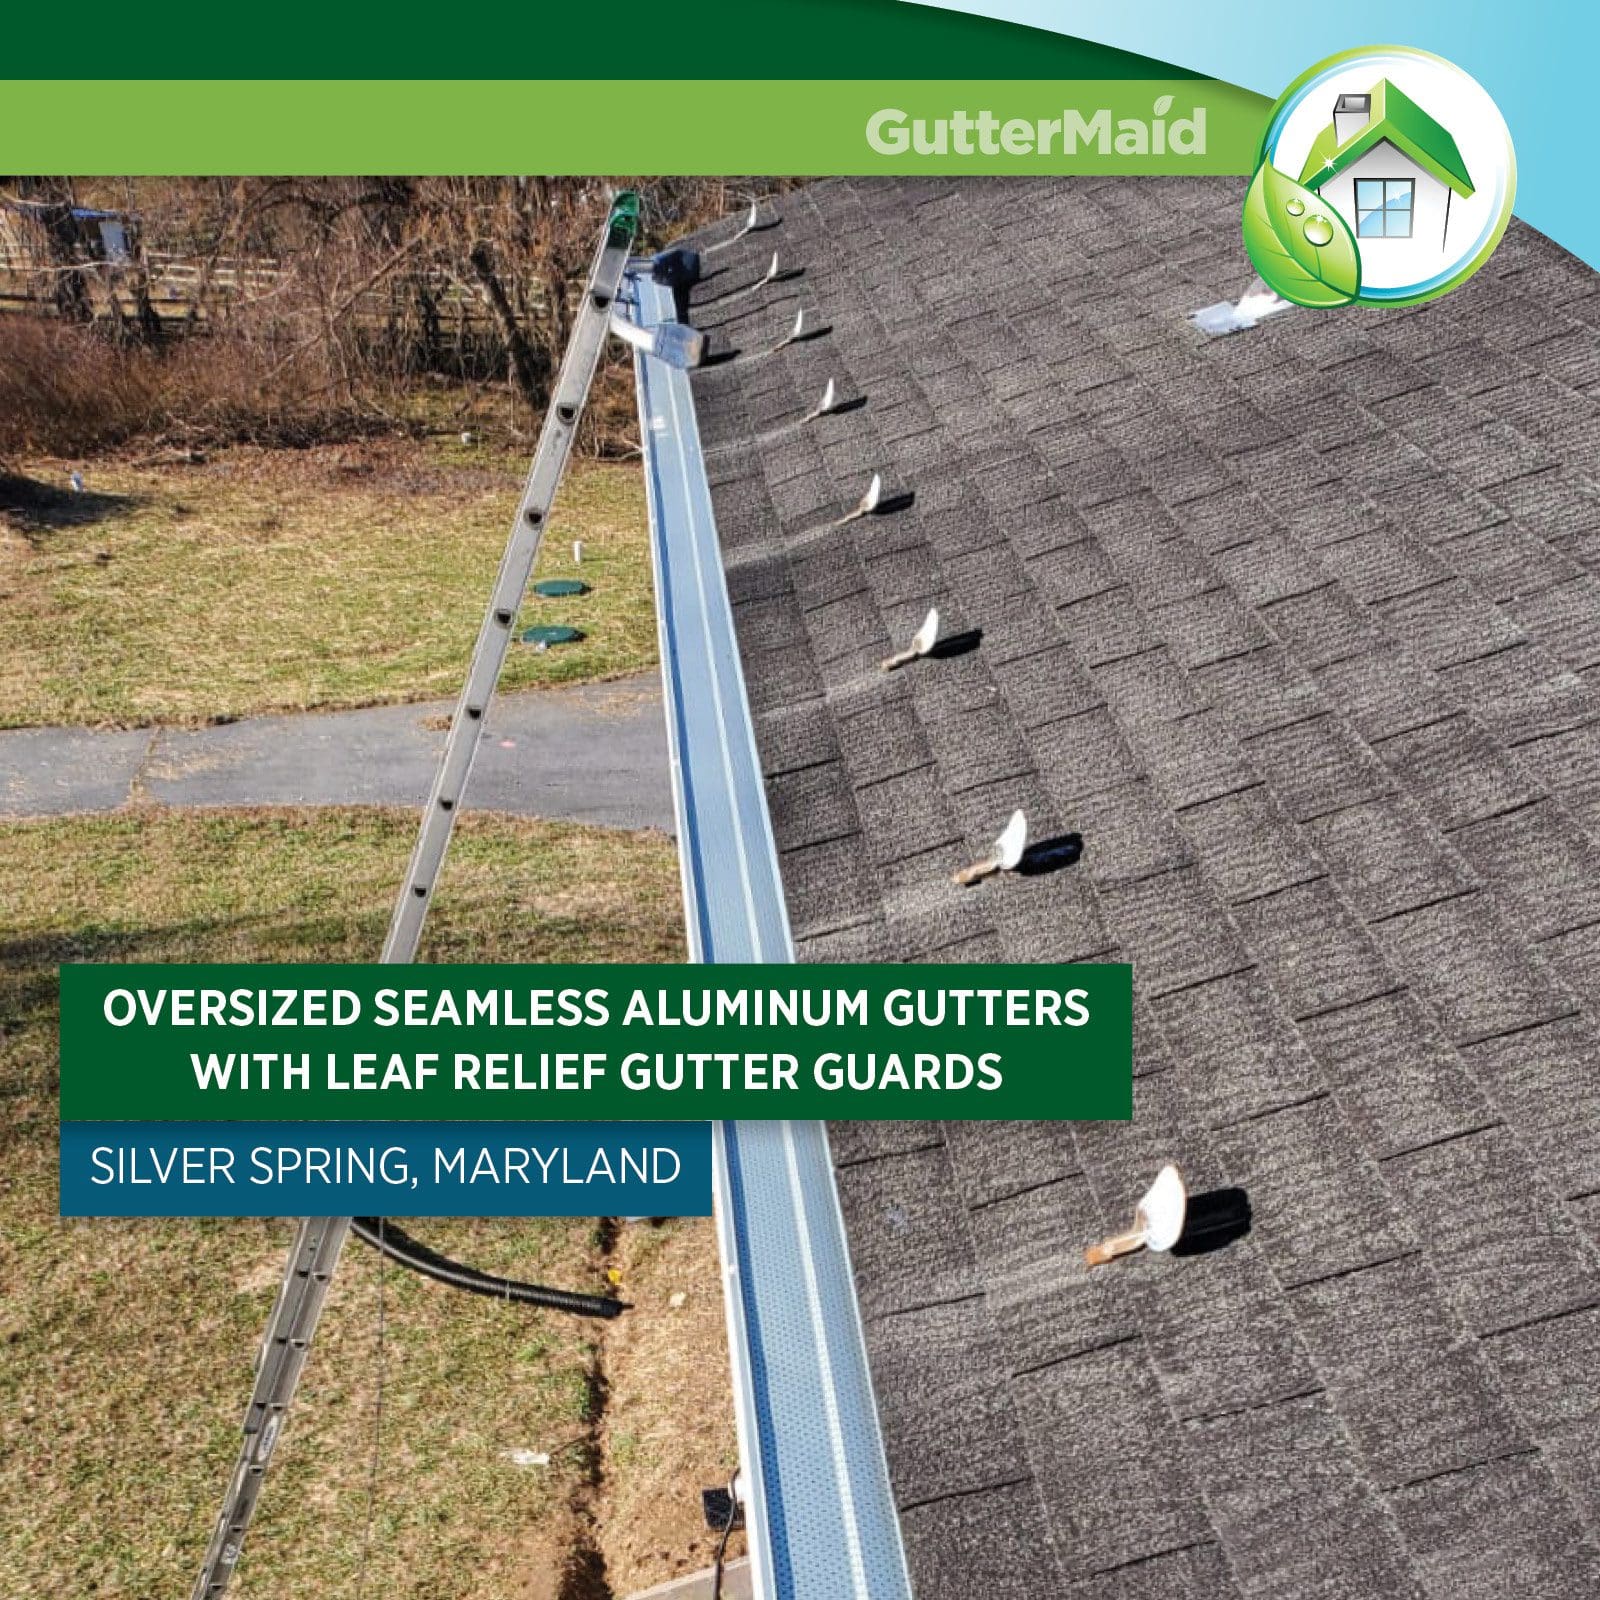 Oversize seamless aluminum gutters with leaf relief gutter guards in silver spring maryland